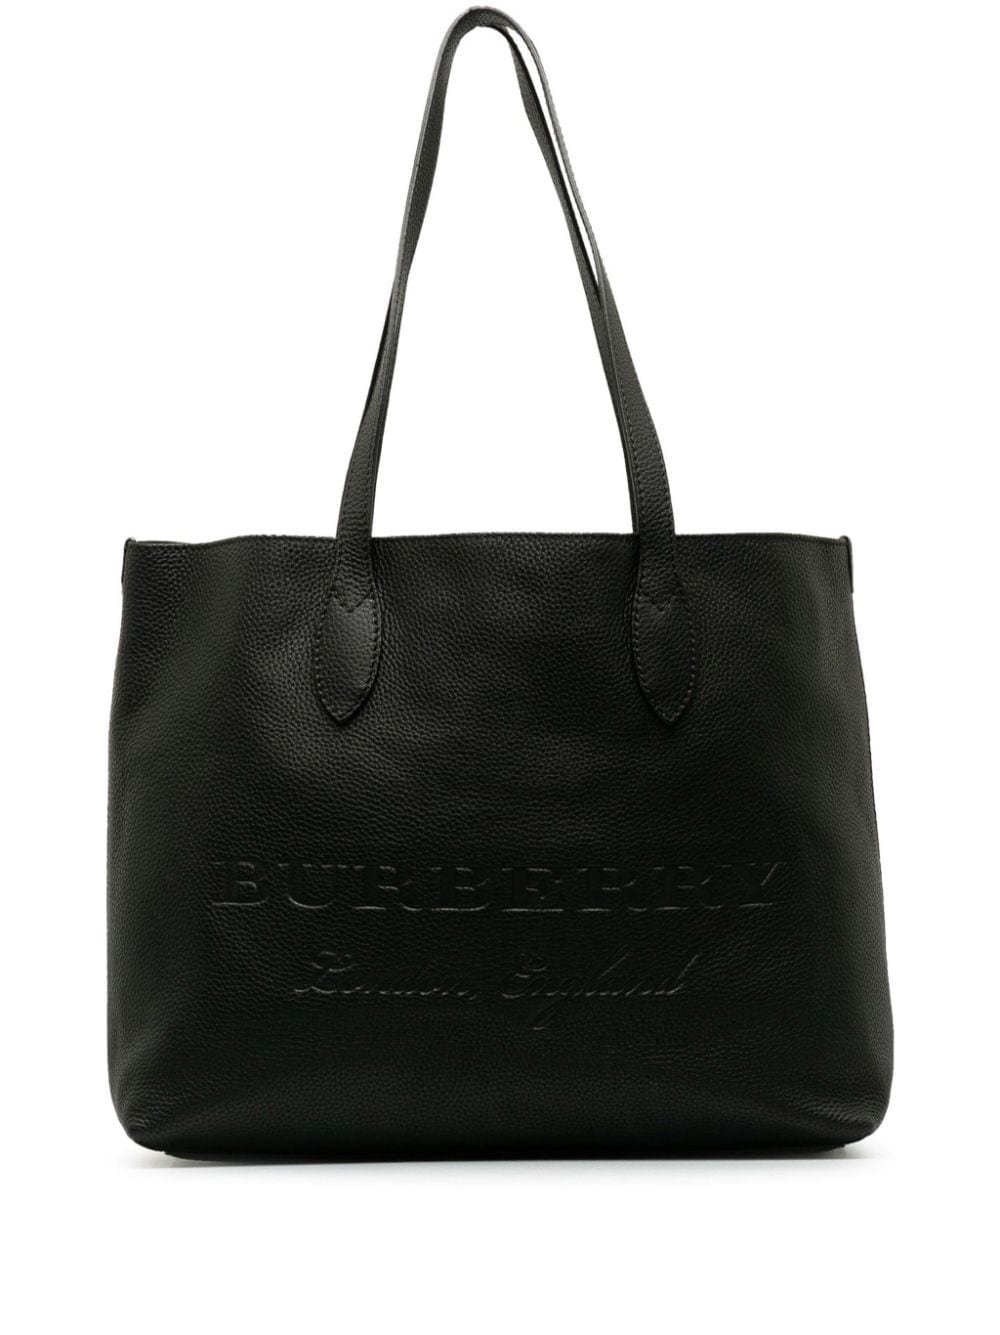 Pre-owned Burberry 2000-2017 Remington Tote Bag In Black